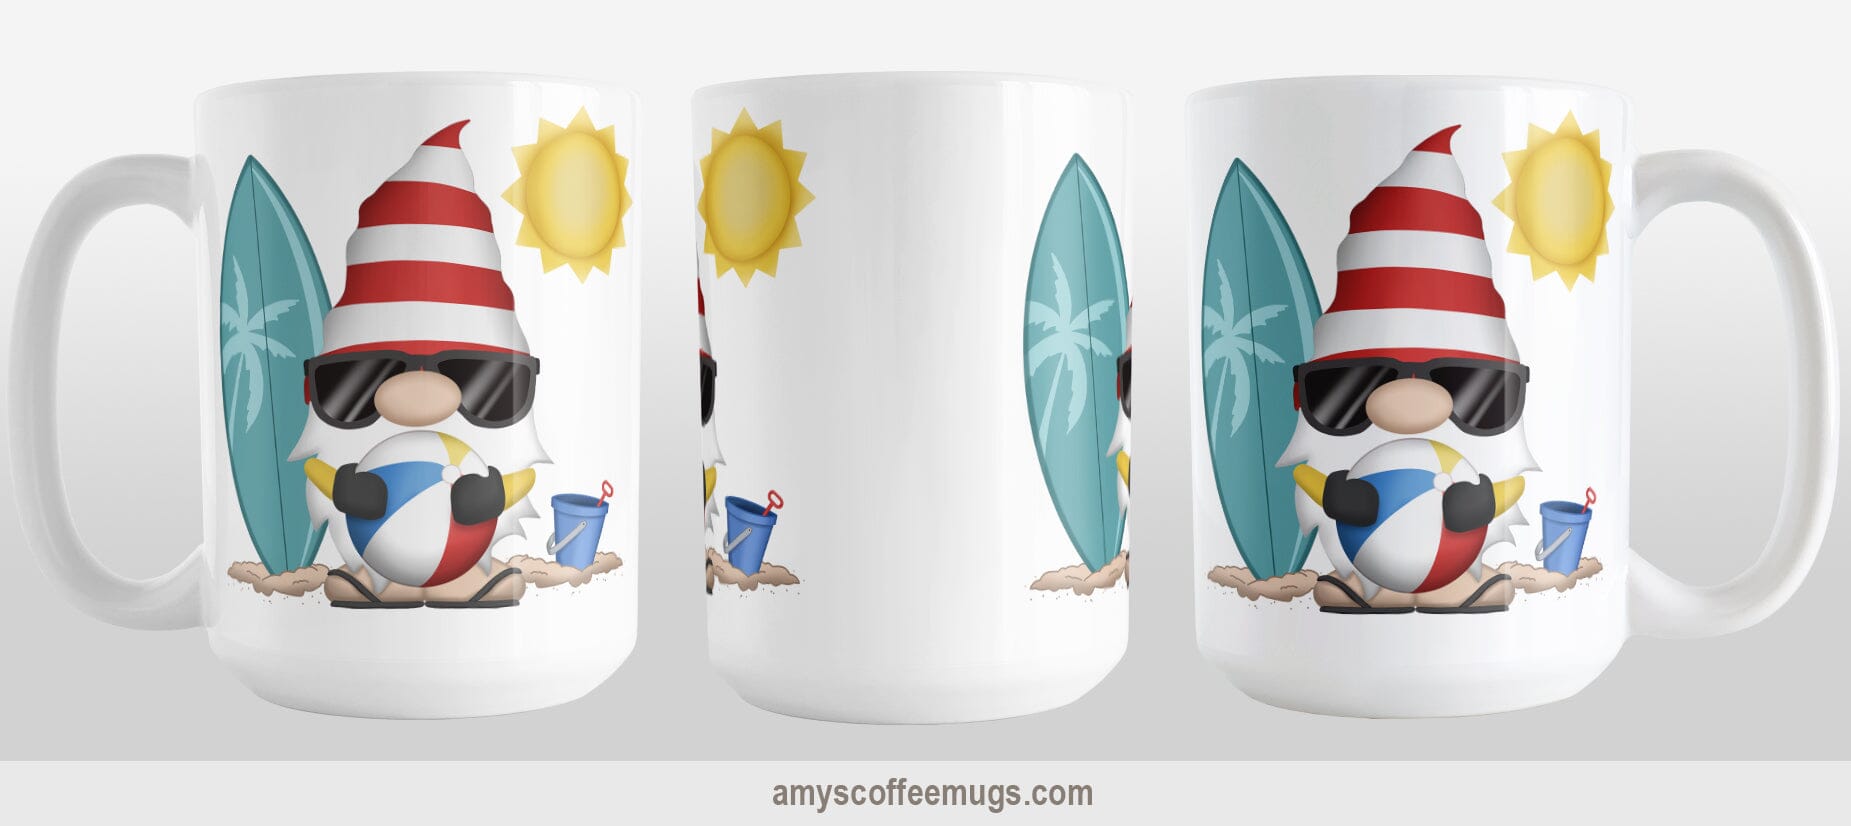 Summer Beach Gnome Mug (15oz) at Amy's Coffee Mugs. A ceramic coffee mug designed with an adorable gnome in sunglasses, holding a beach ball, with a surfboard and bucket in the sand on either side of him, and a bright yellow sun in the sky. This cute gnome is on both sides of the mug. Image shows 3 sides of the mug for a full view of the illustration and design.